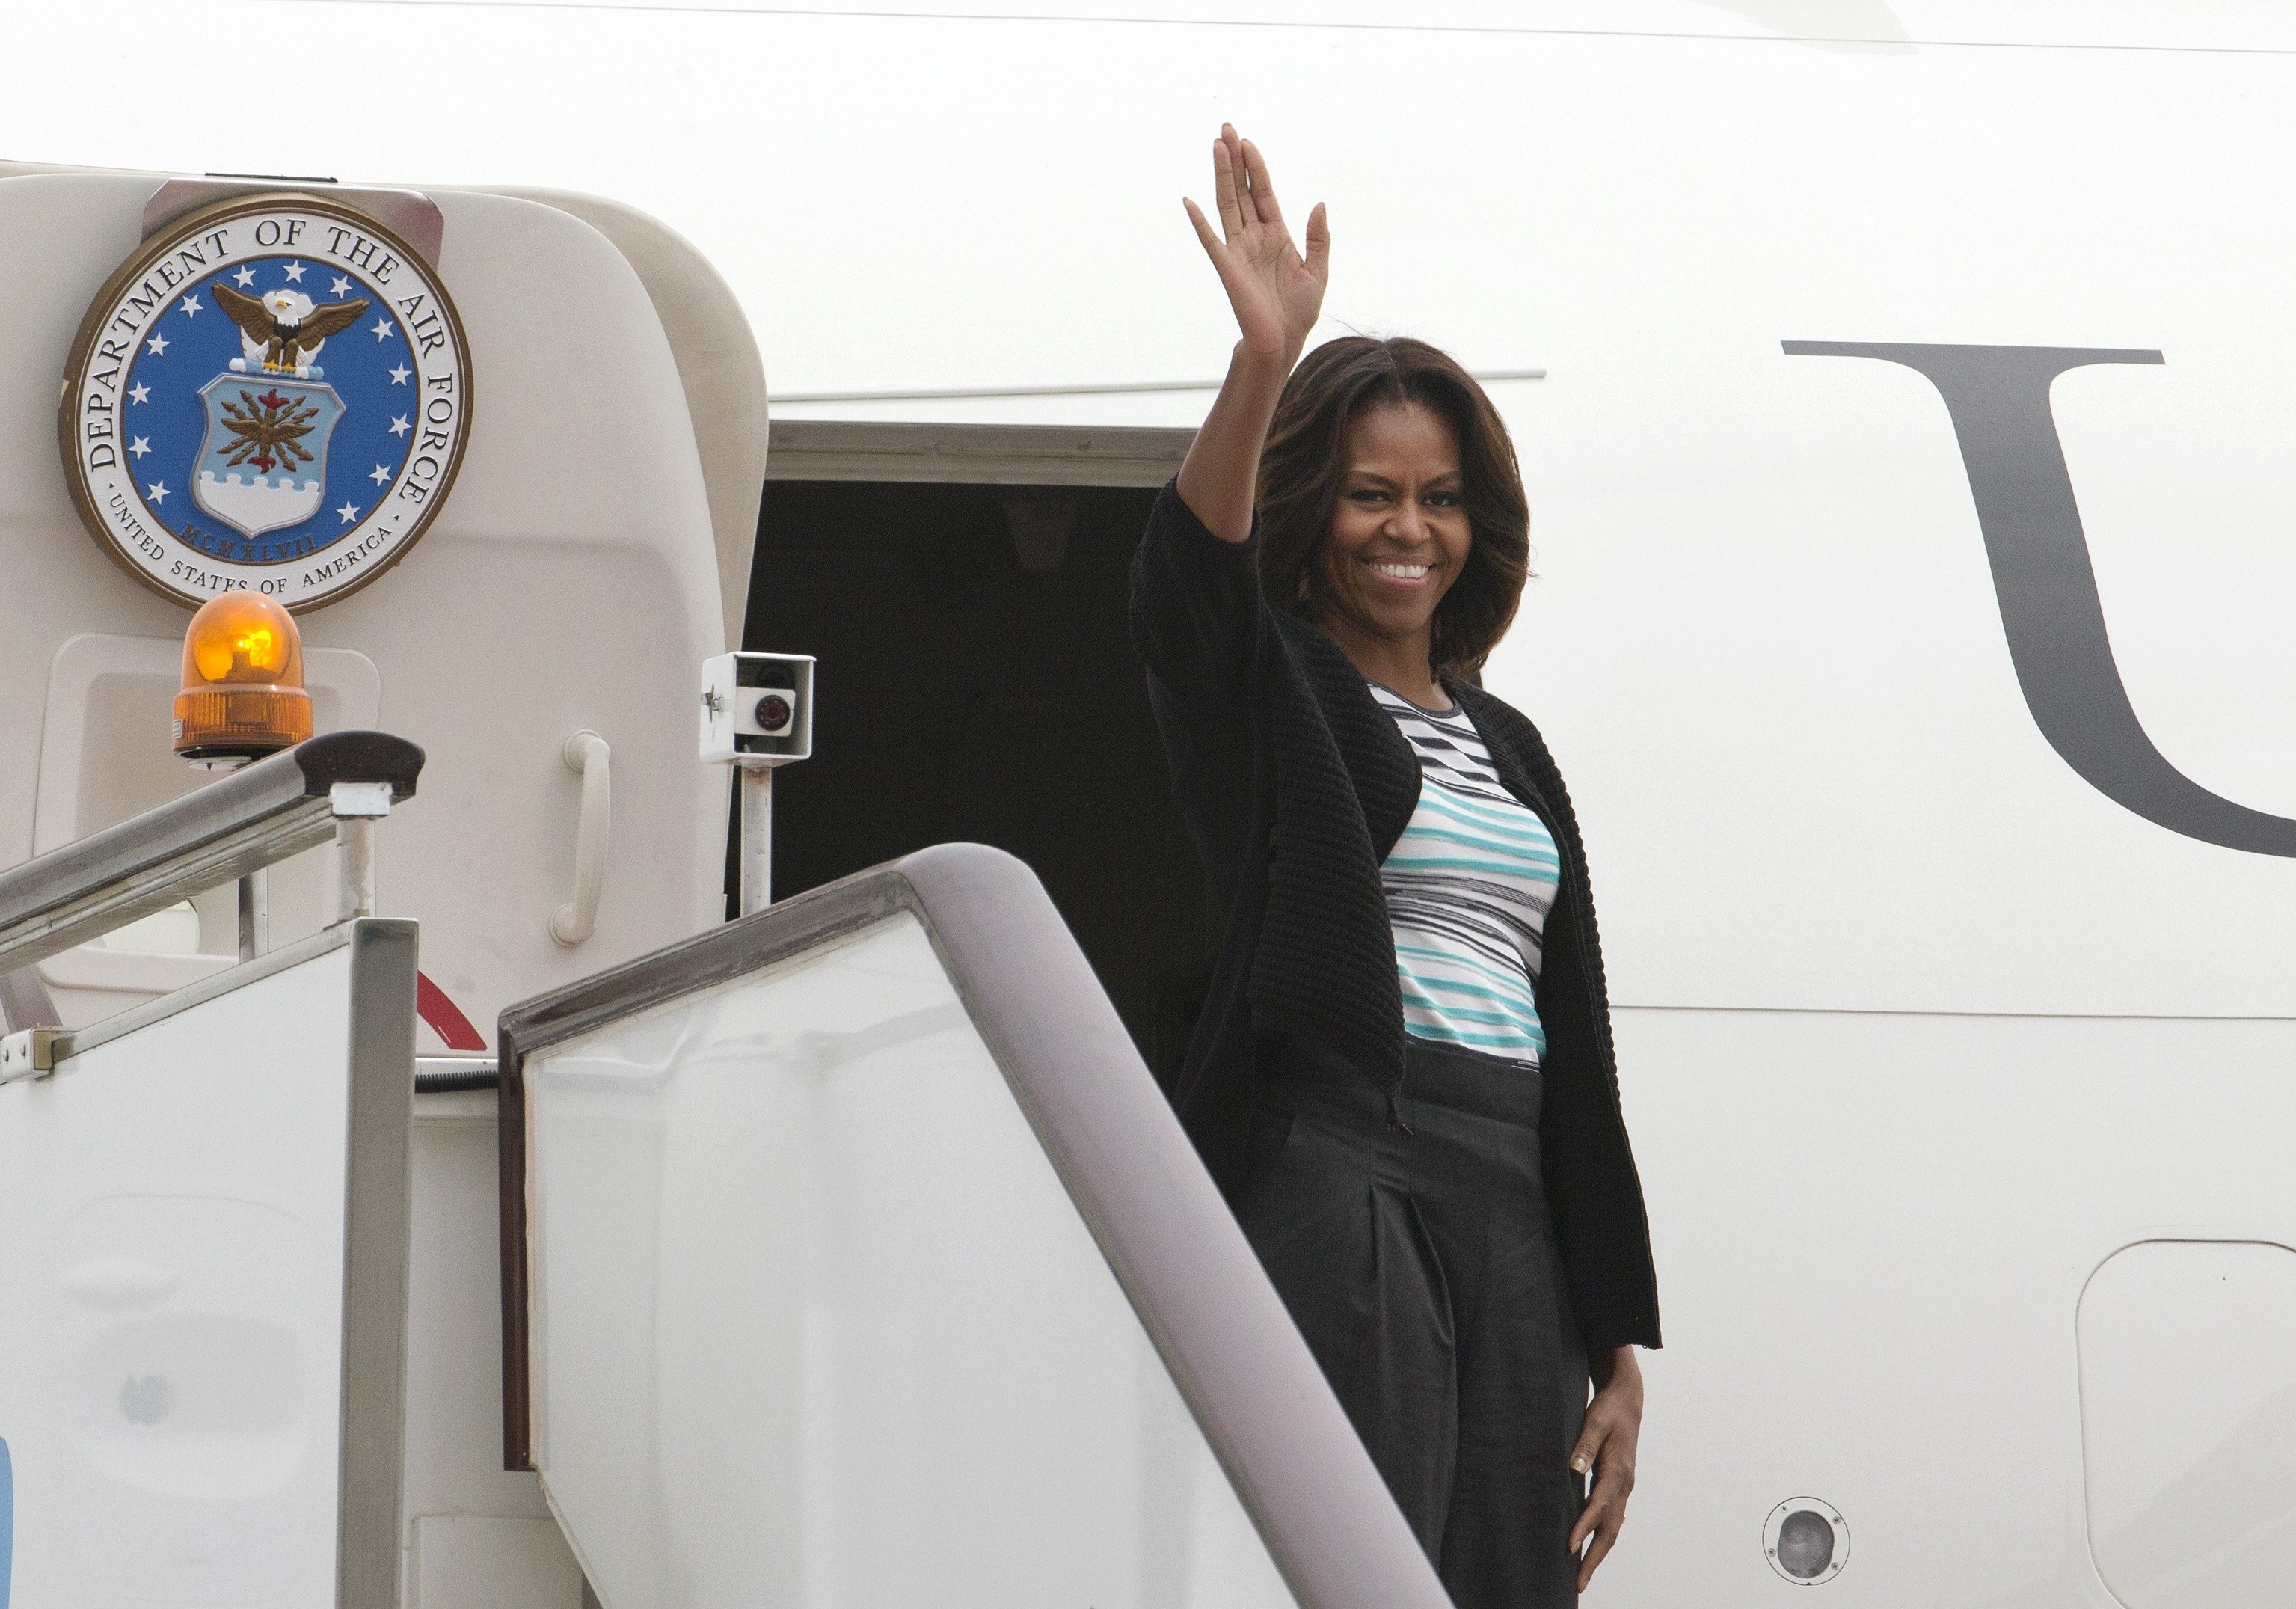 U.S. first lady Michelle Obama waves before departing Chengdu Airport in southwest China's Sichuan province Wednesday, March 26, 2014.